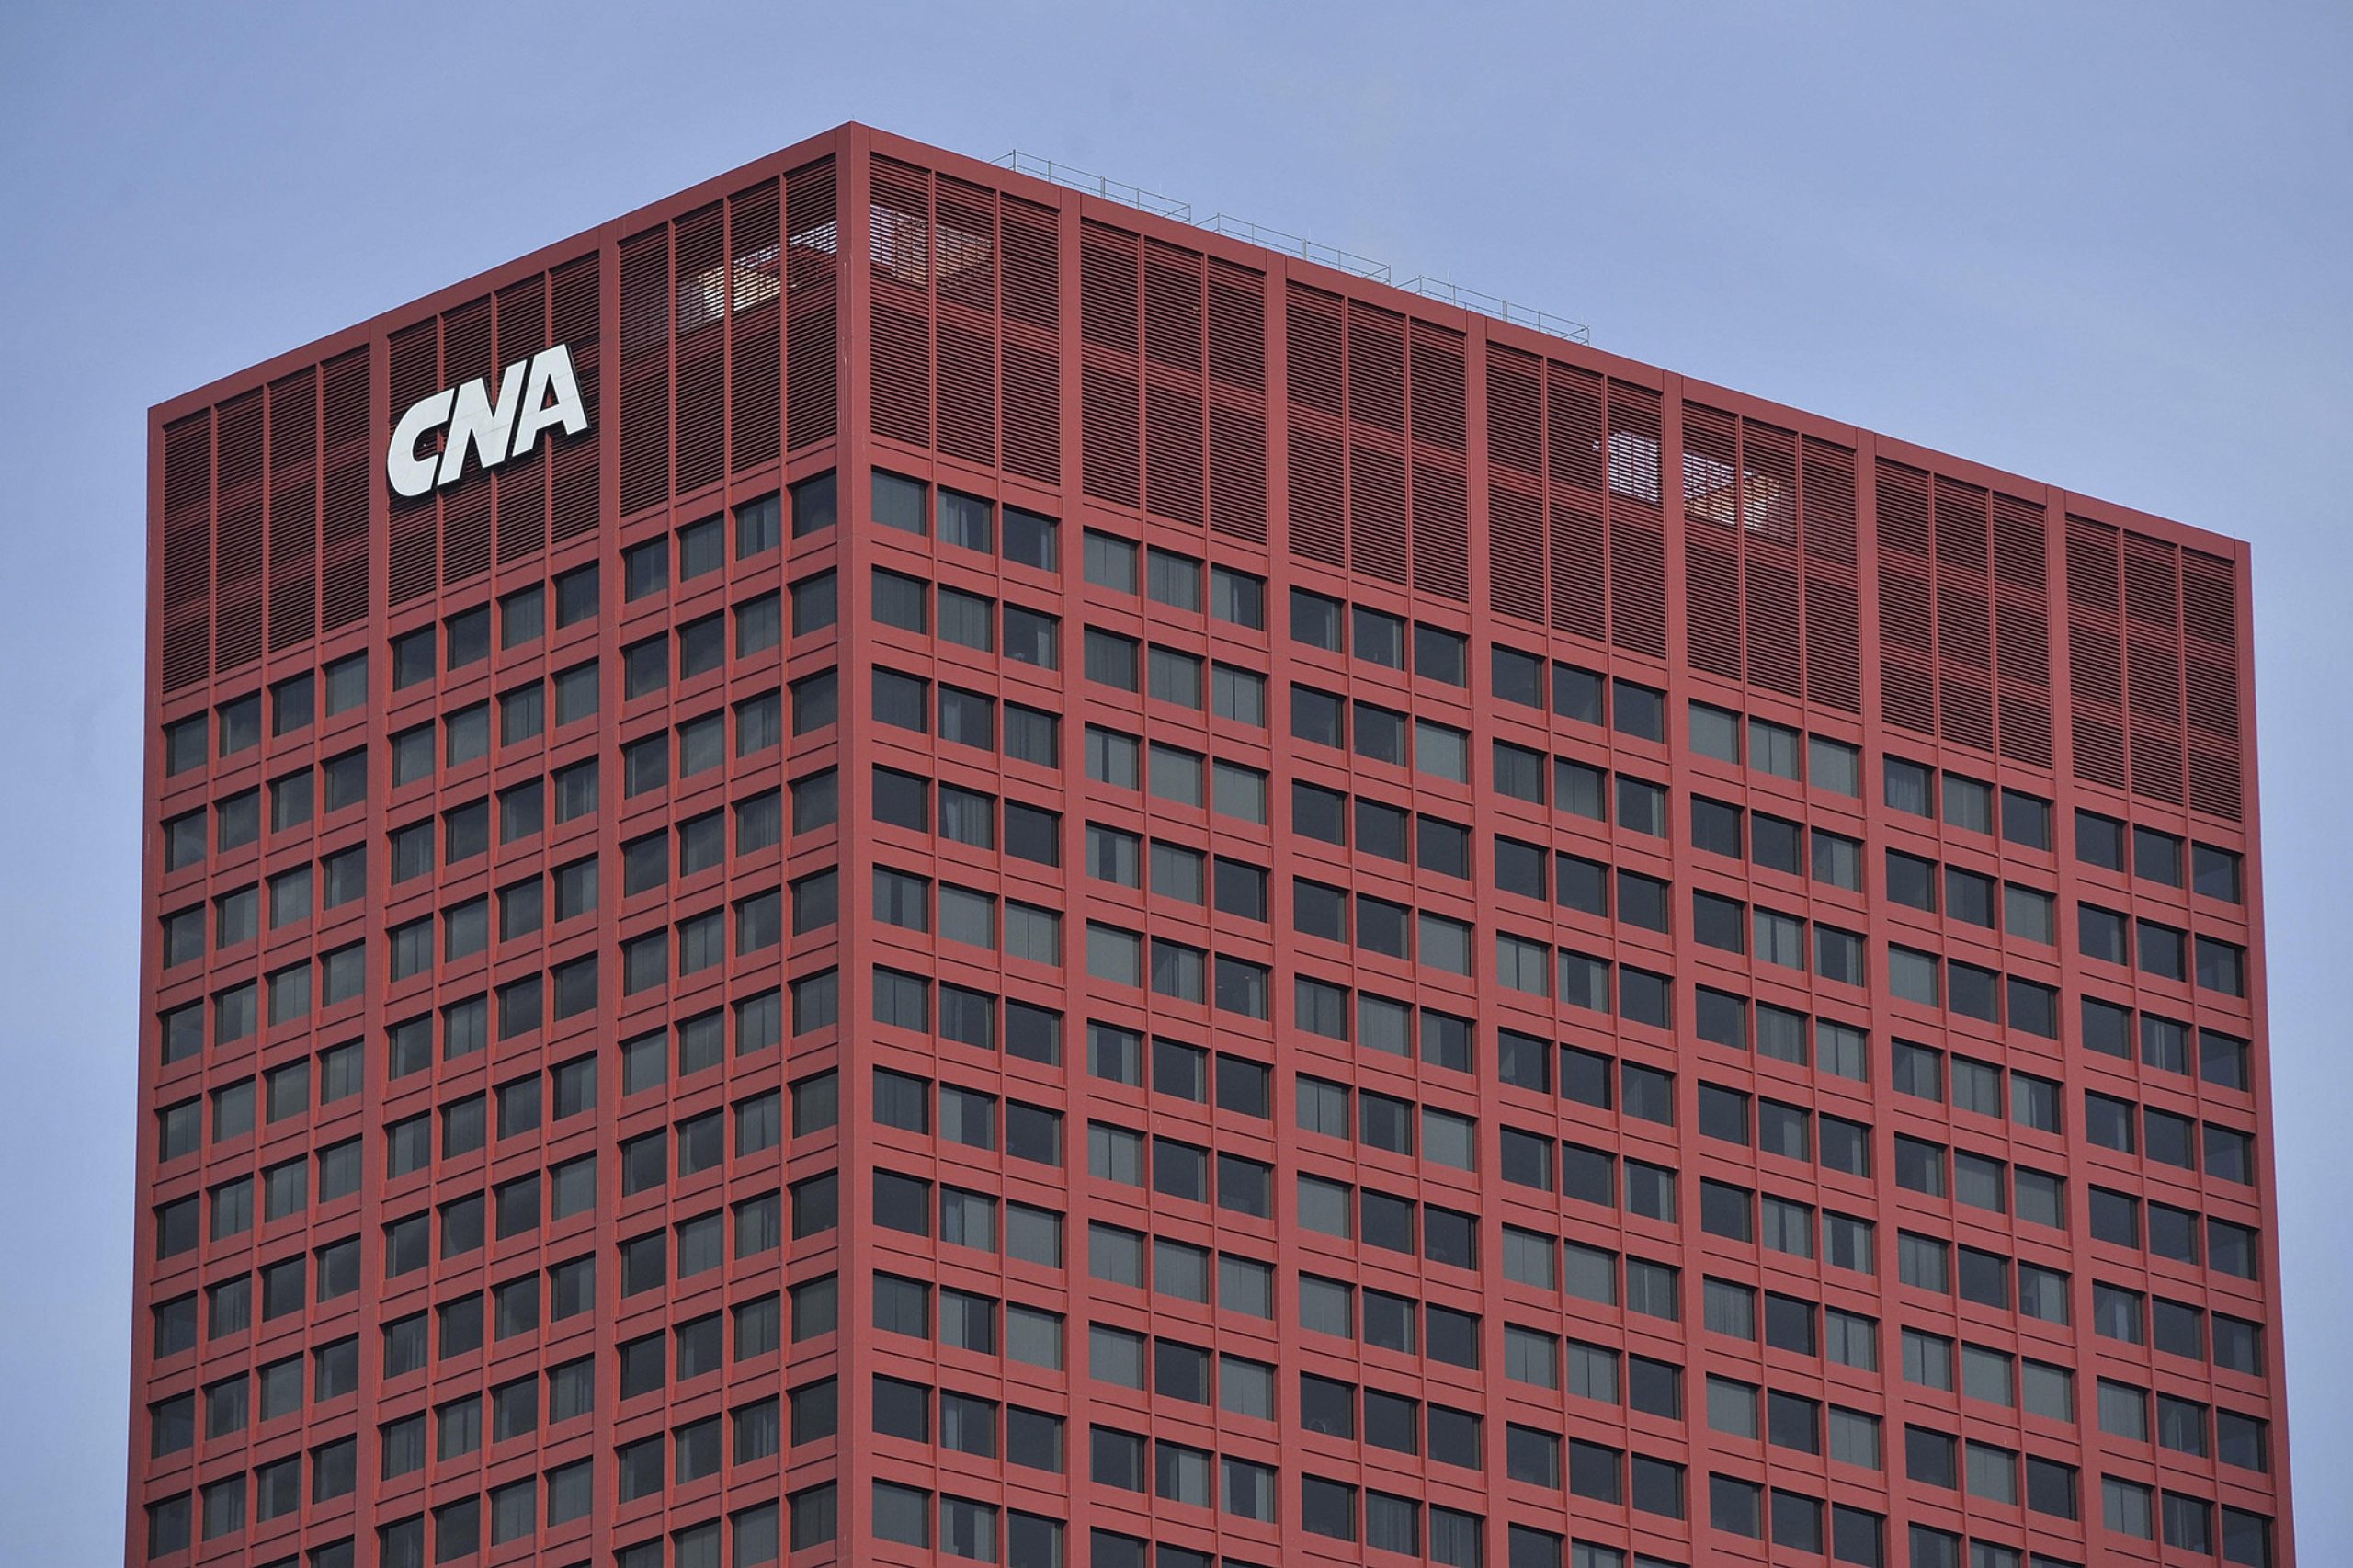 Insurance giant CNA Financial reportedly paid hackers $40M in ransom